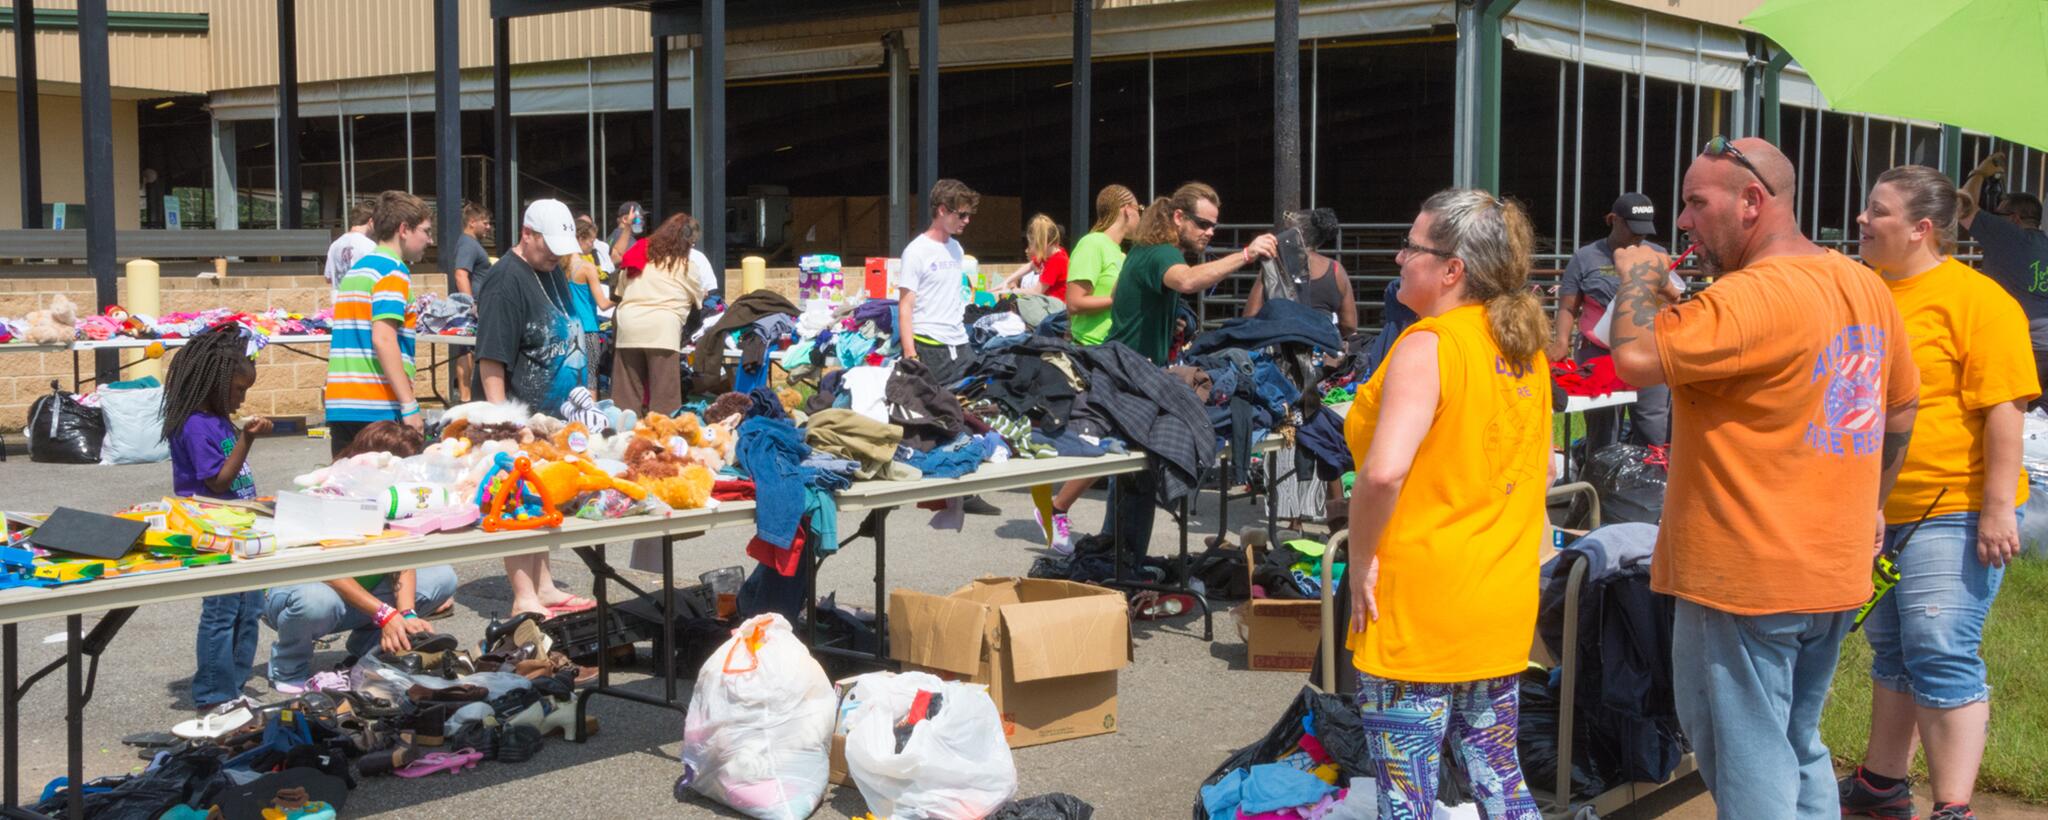 Volunteers and organizations brought clothing and other necessities for people to take as needed